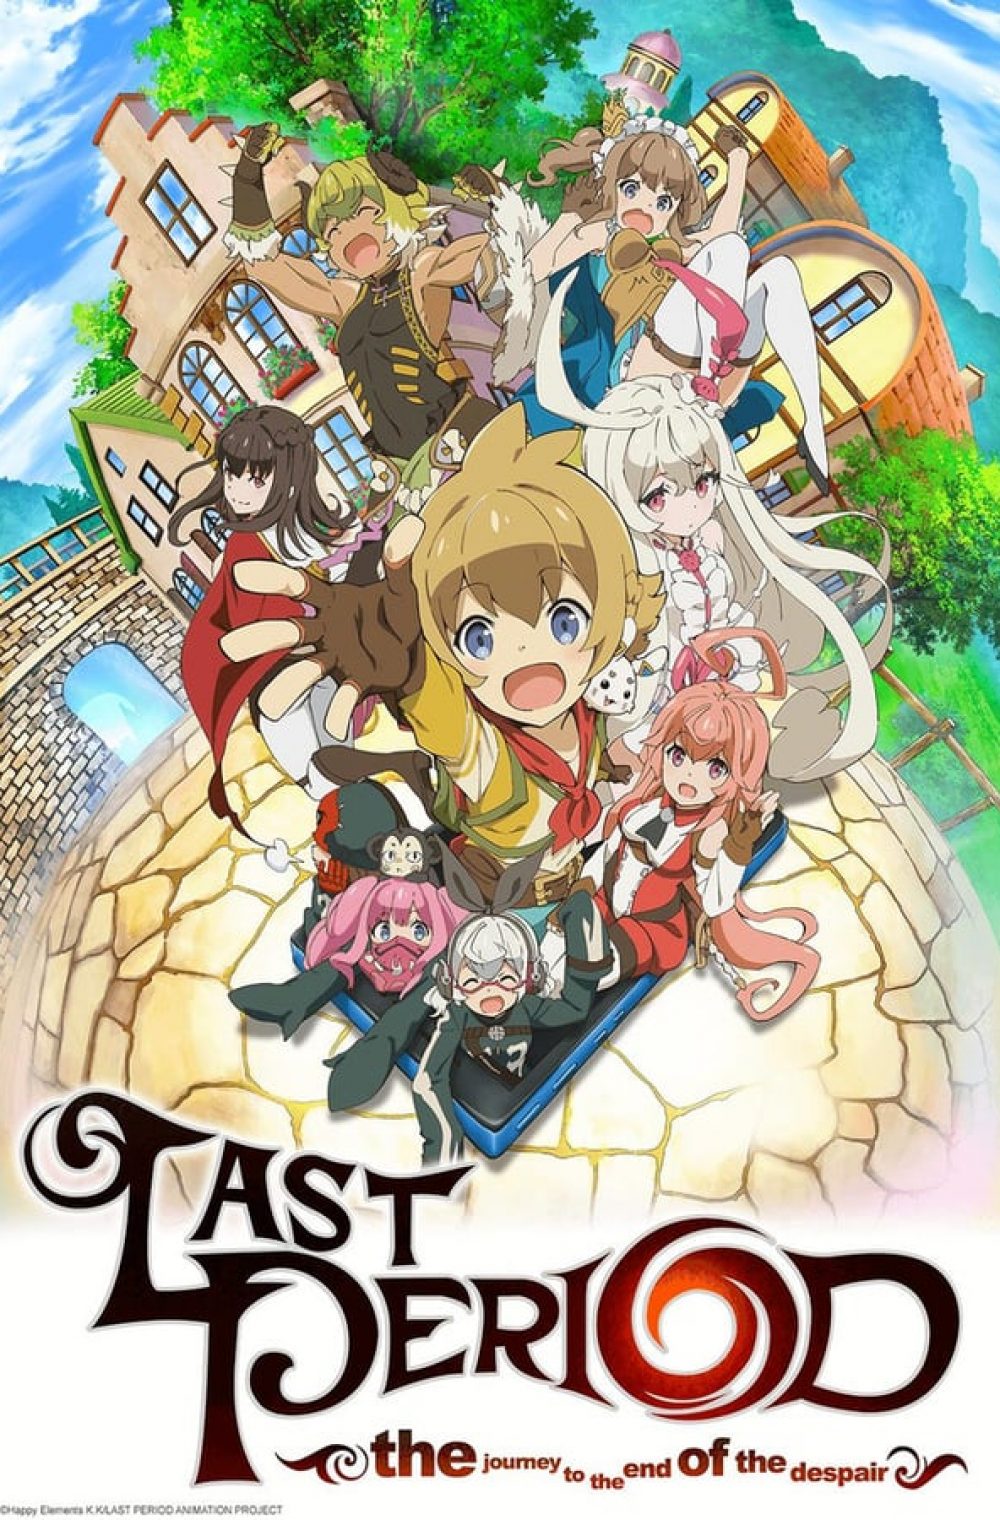 Last Period: the journey to the end of the despair